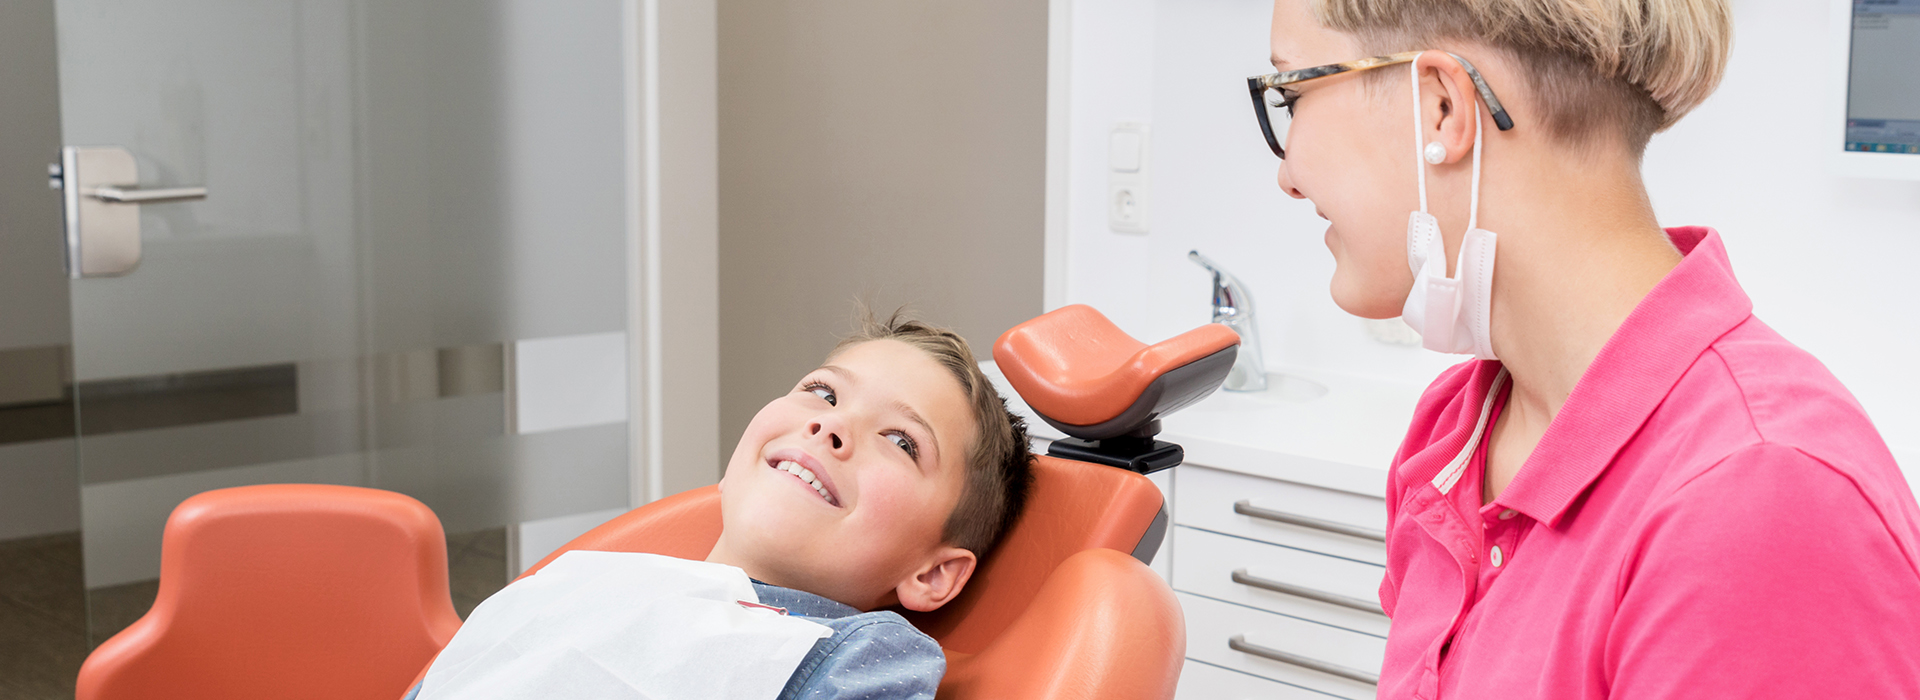 A dental hygiene scene with a child in the chair, a dentist at work, and a parent observing.